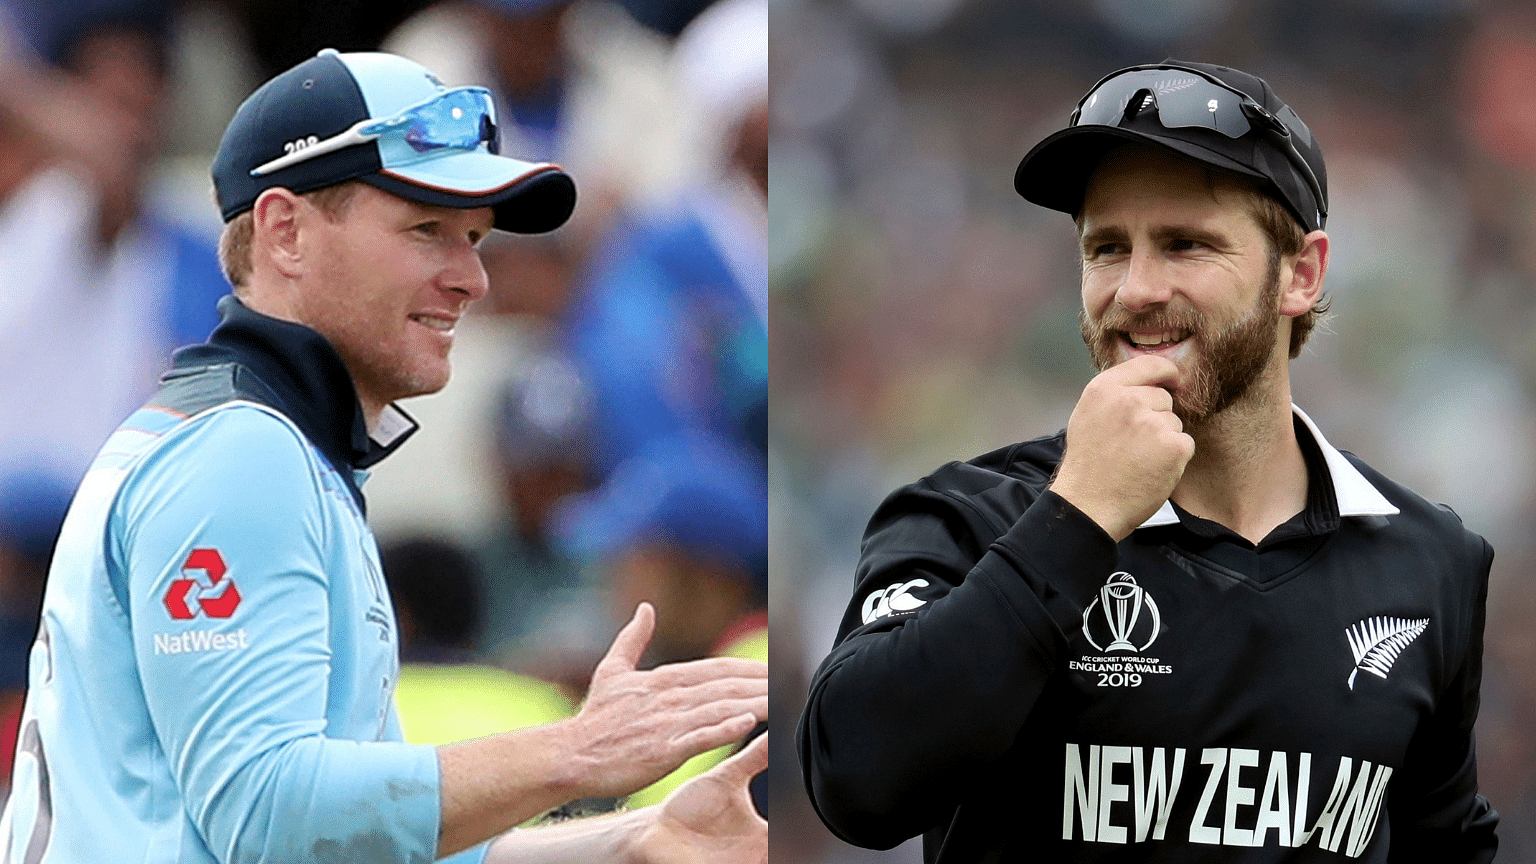 England play New Zealand in the ICC World Cup 2019 final on Sunday at Lord’s.